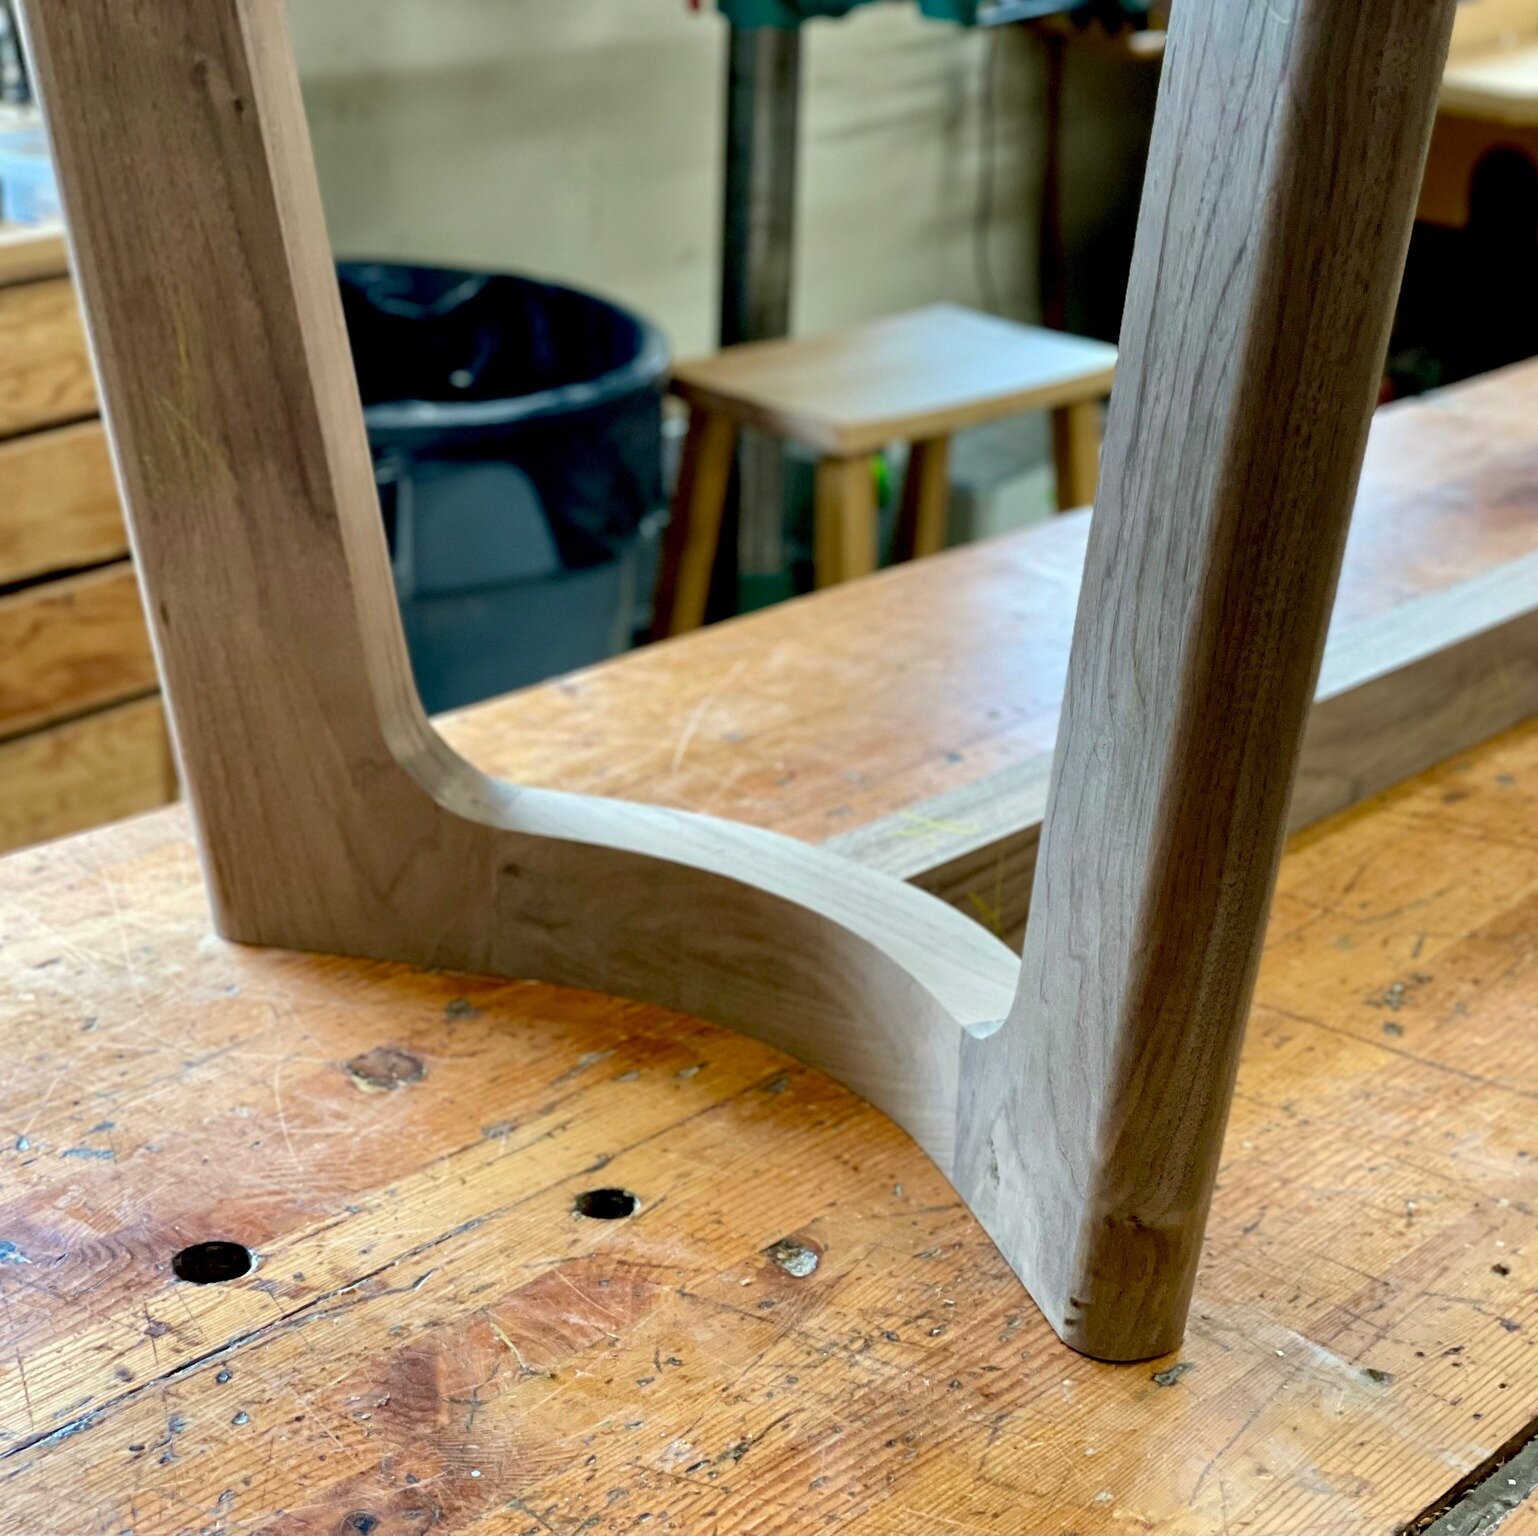 Some detail progress shots of this sculpted walnut dining table build. 

Always appreciate clients who are willing to let me experiment with new designs and methods.

Once you break away from straight lines and 90 degree joinery, things get challengi